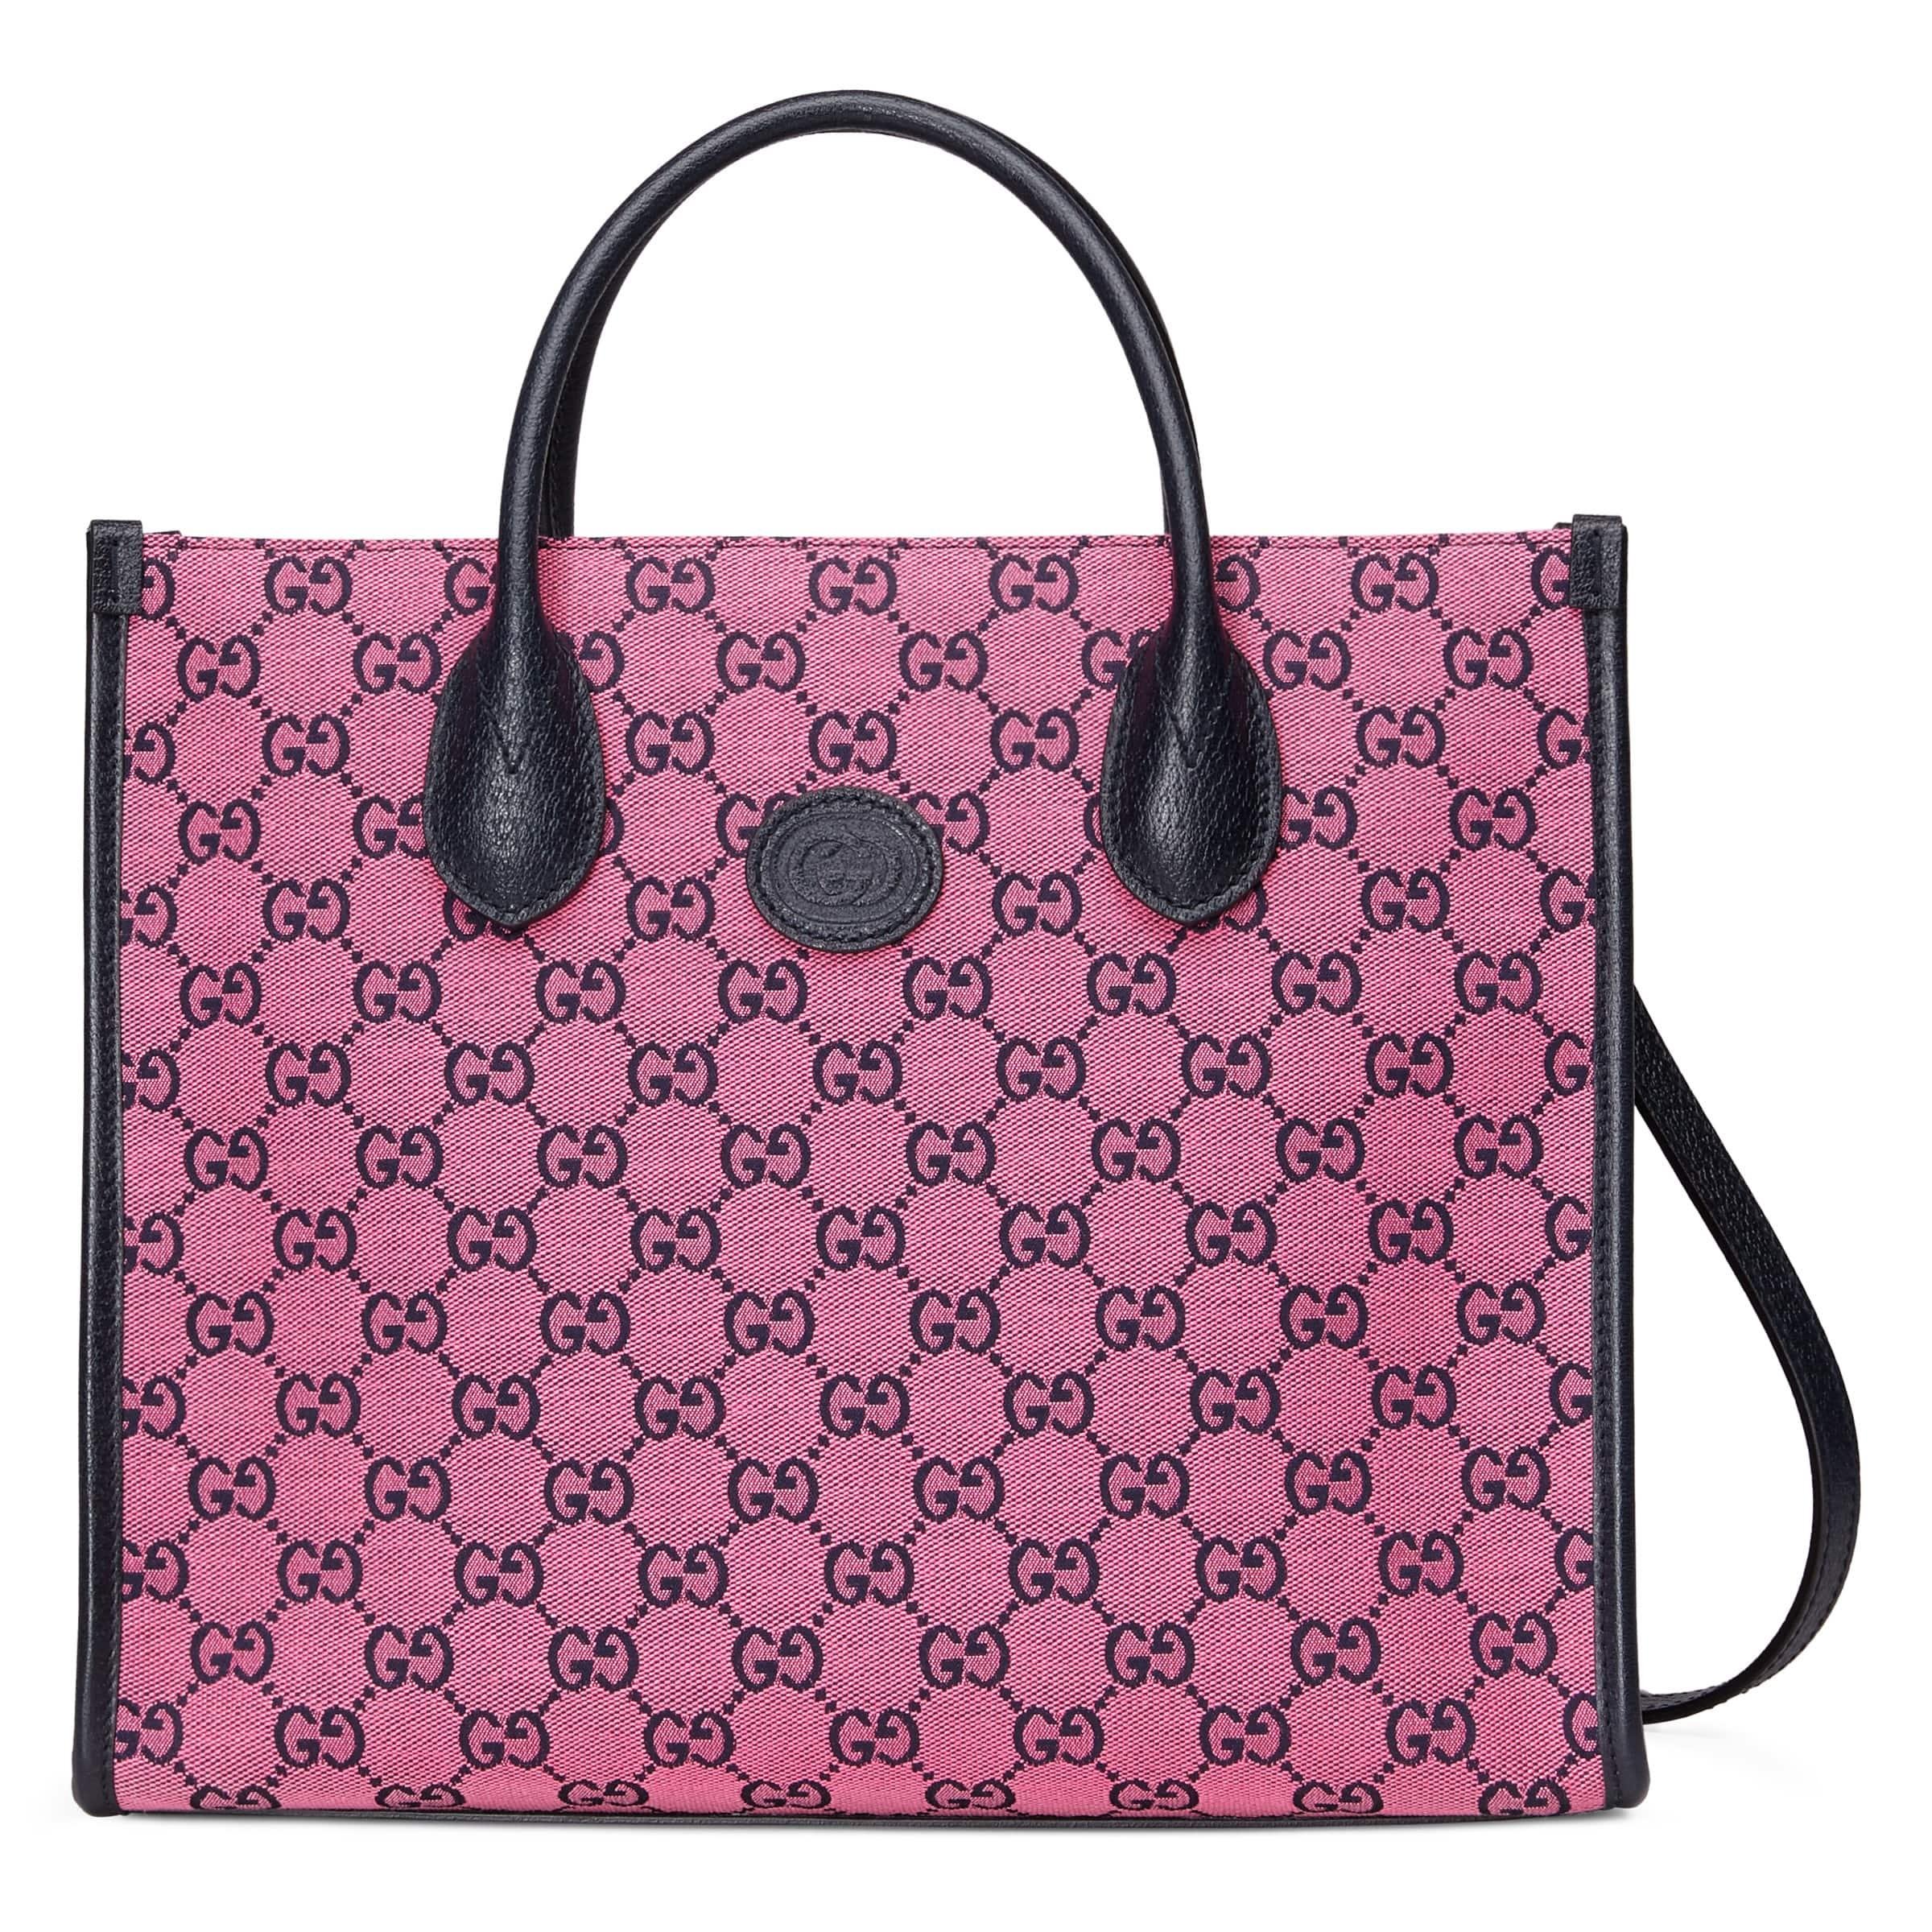 GUCCI OPHIDIA GG WOMENS TOTE BAG WITH DUST BAG at Rs 11999 | Chandni Chowk  | New Delhi | ID: 2852732287830